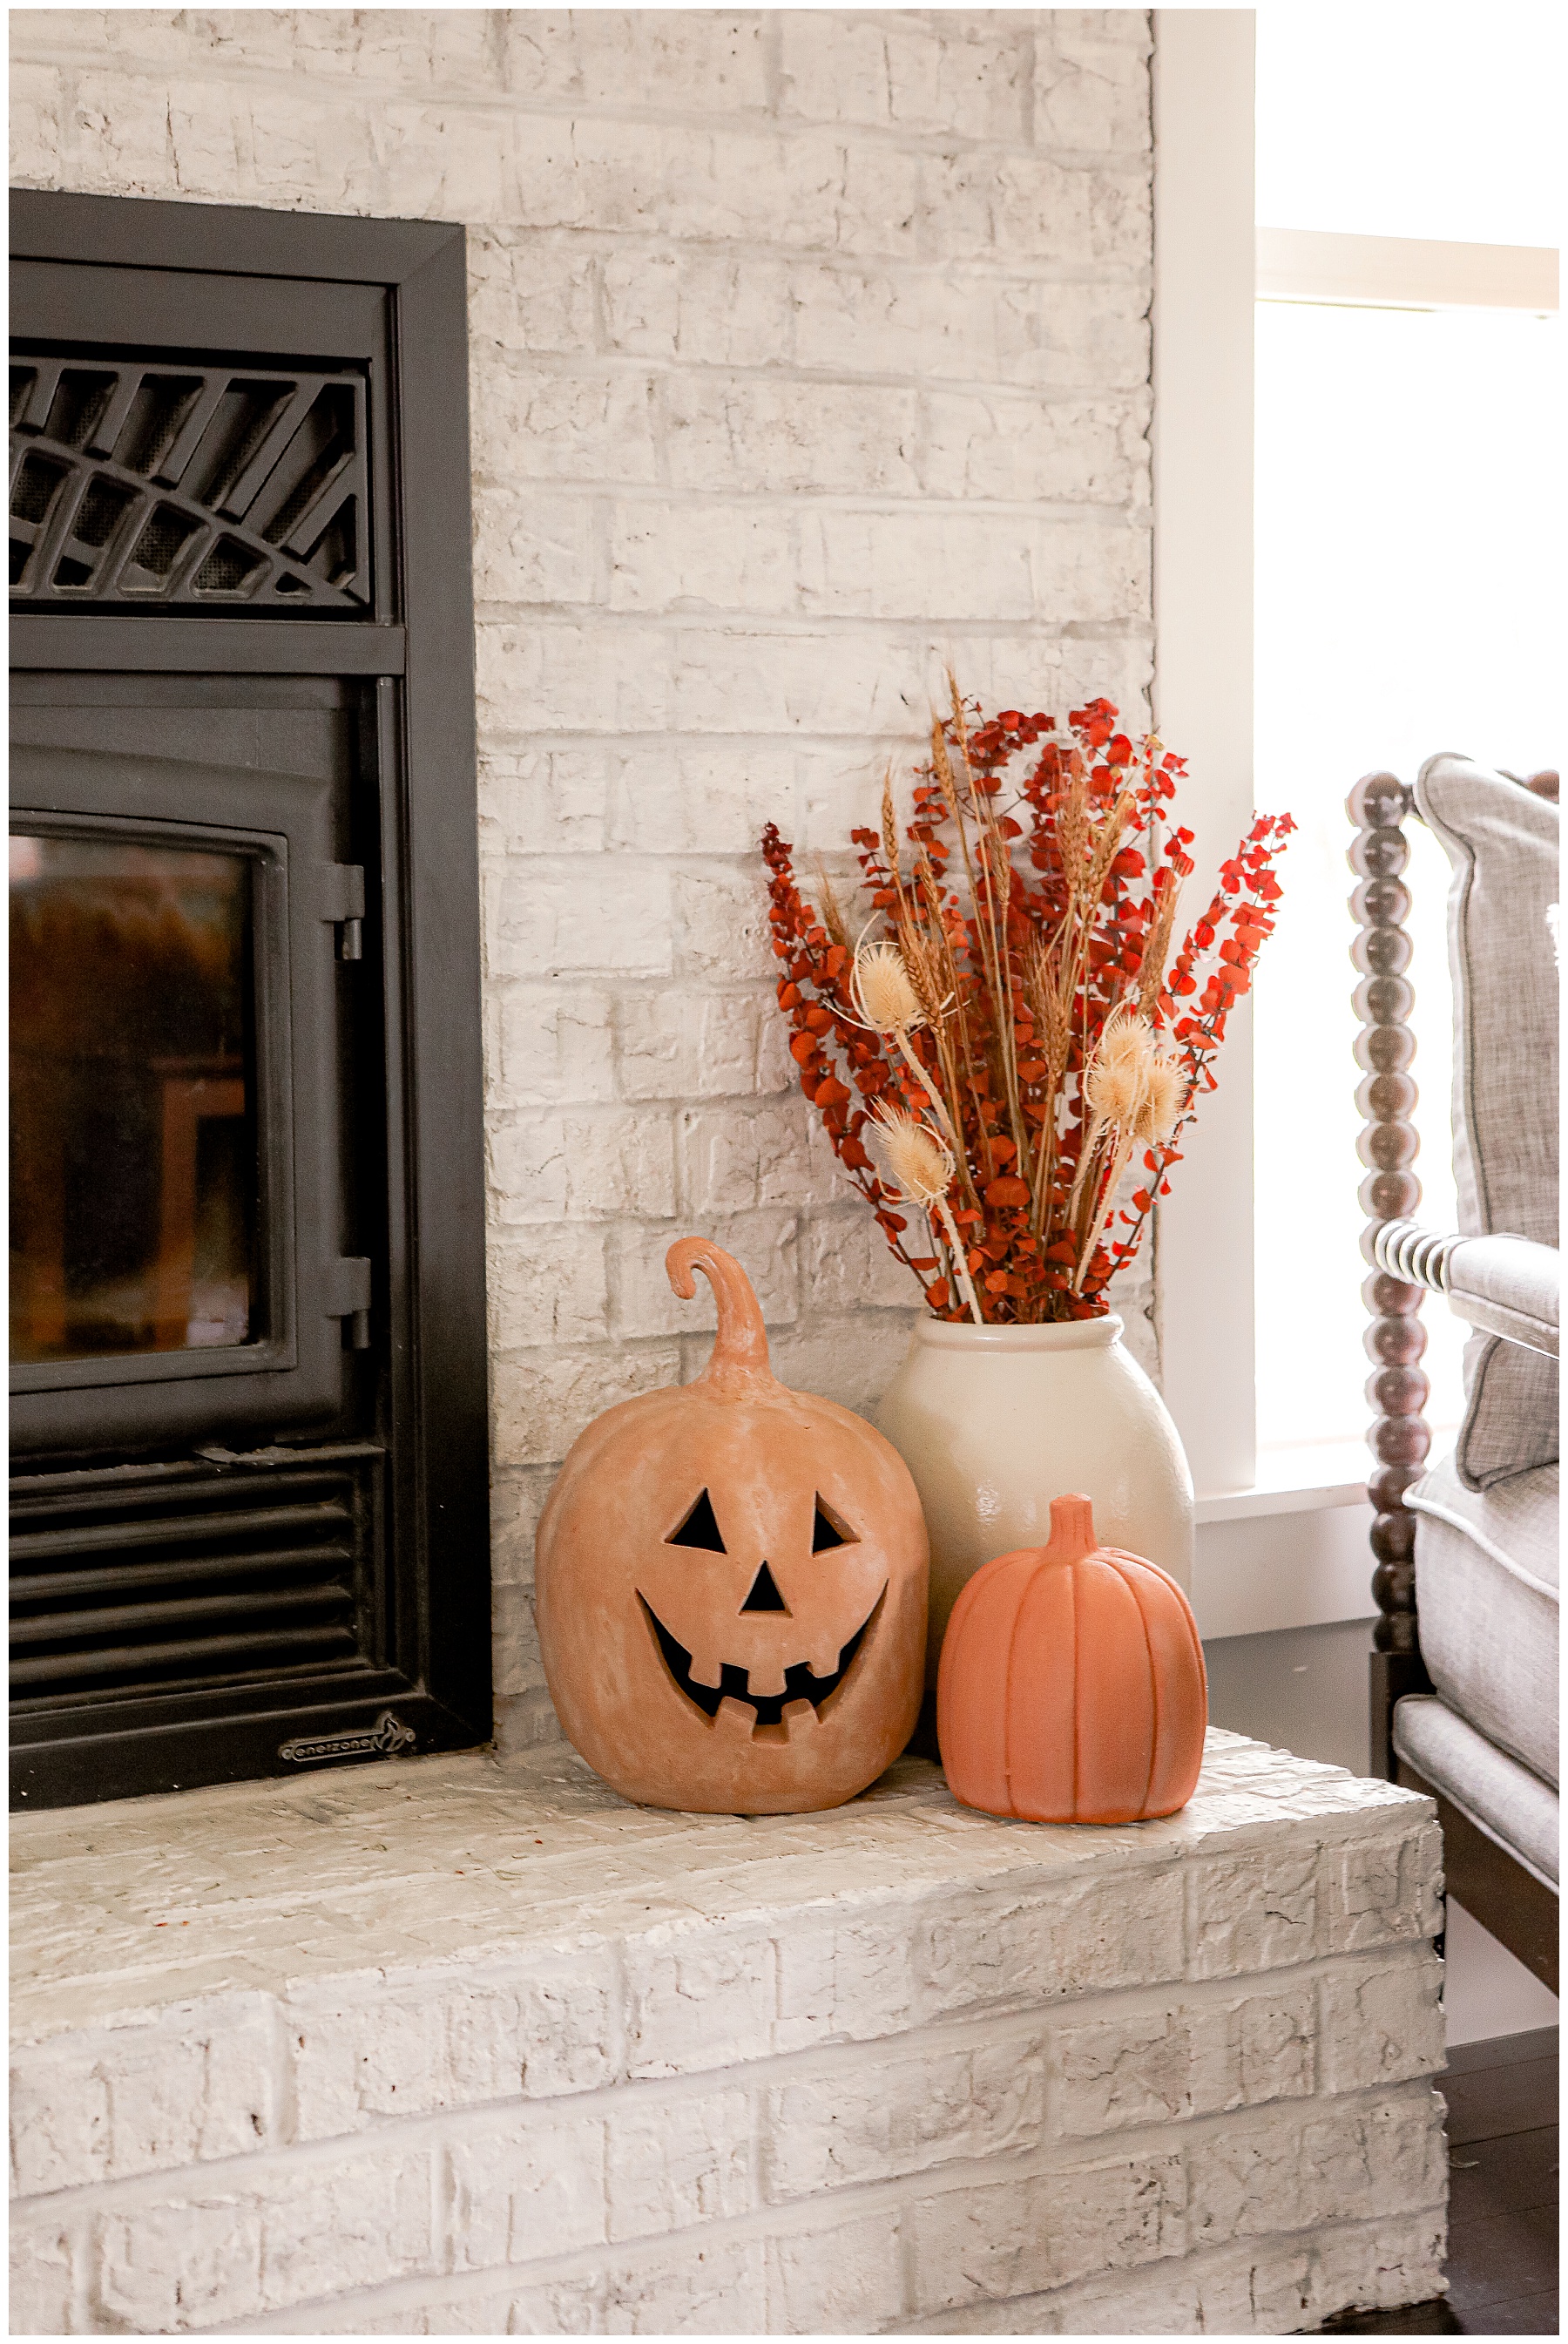 Ideas for Decorating for Fall